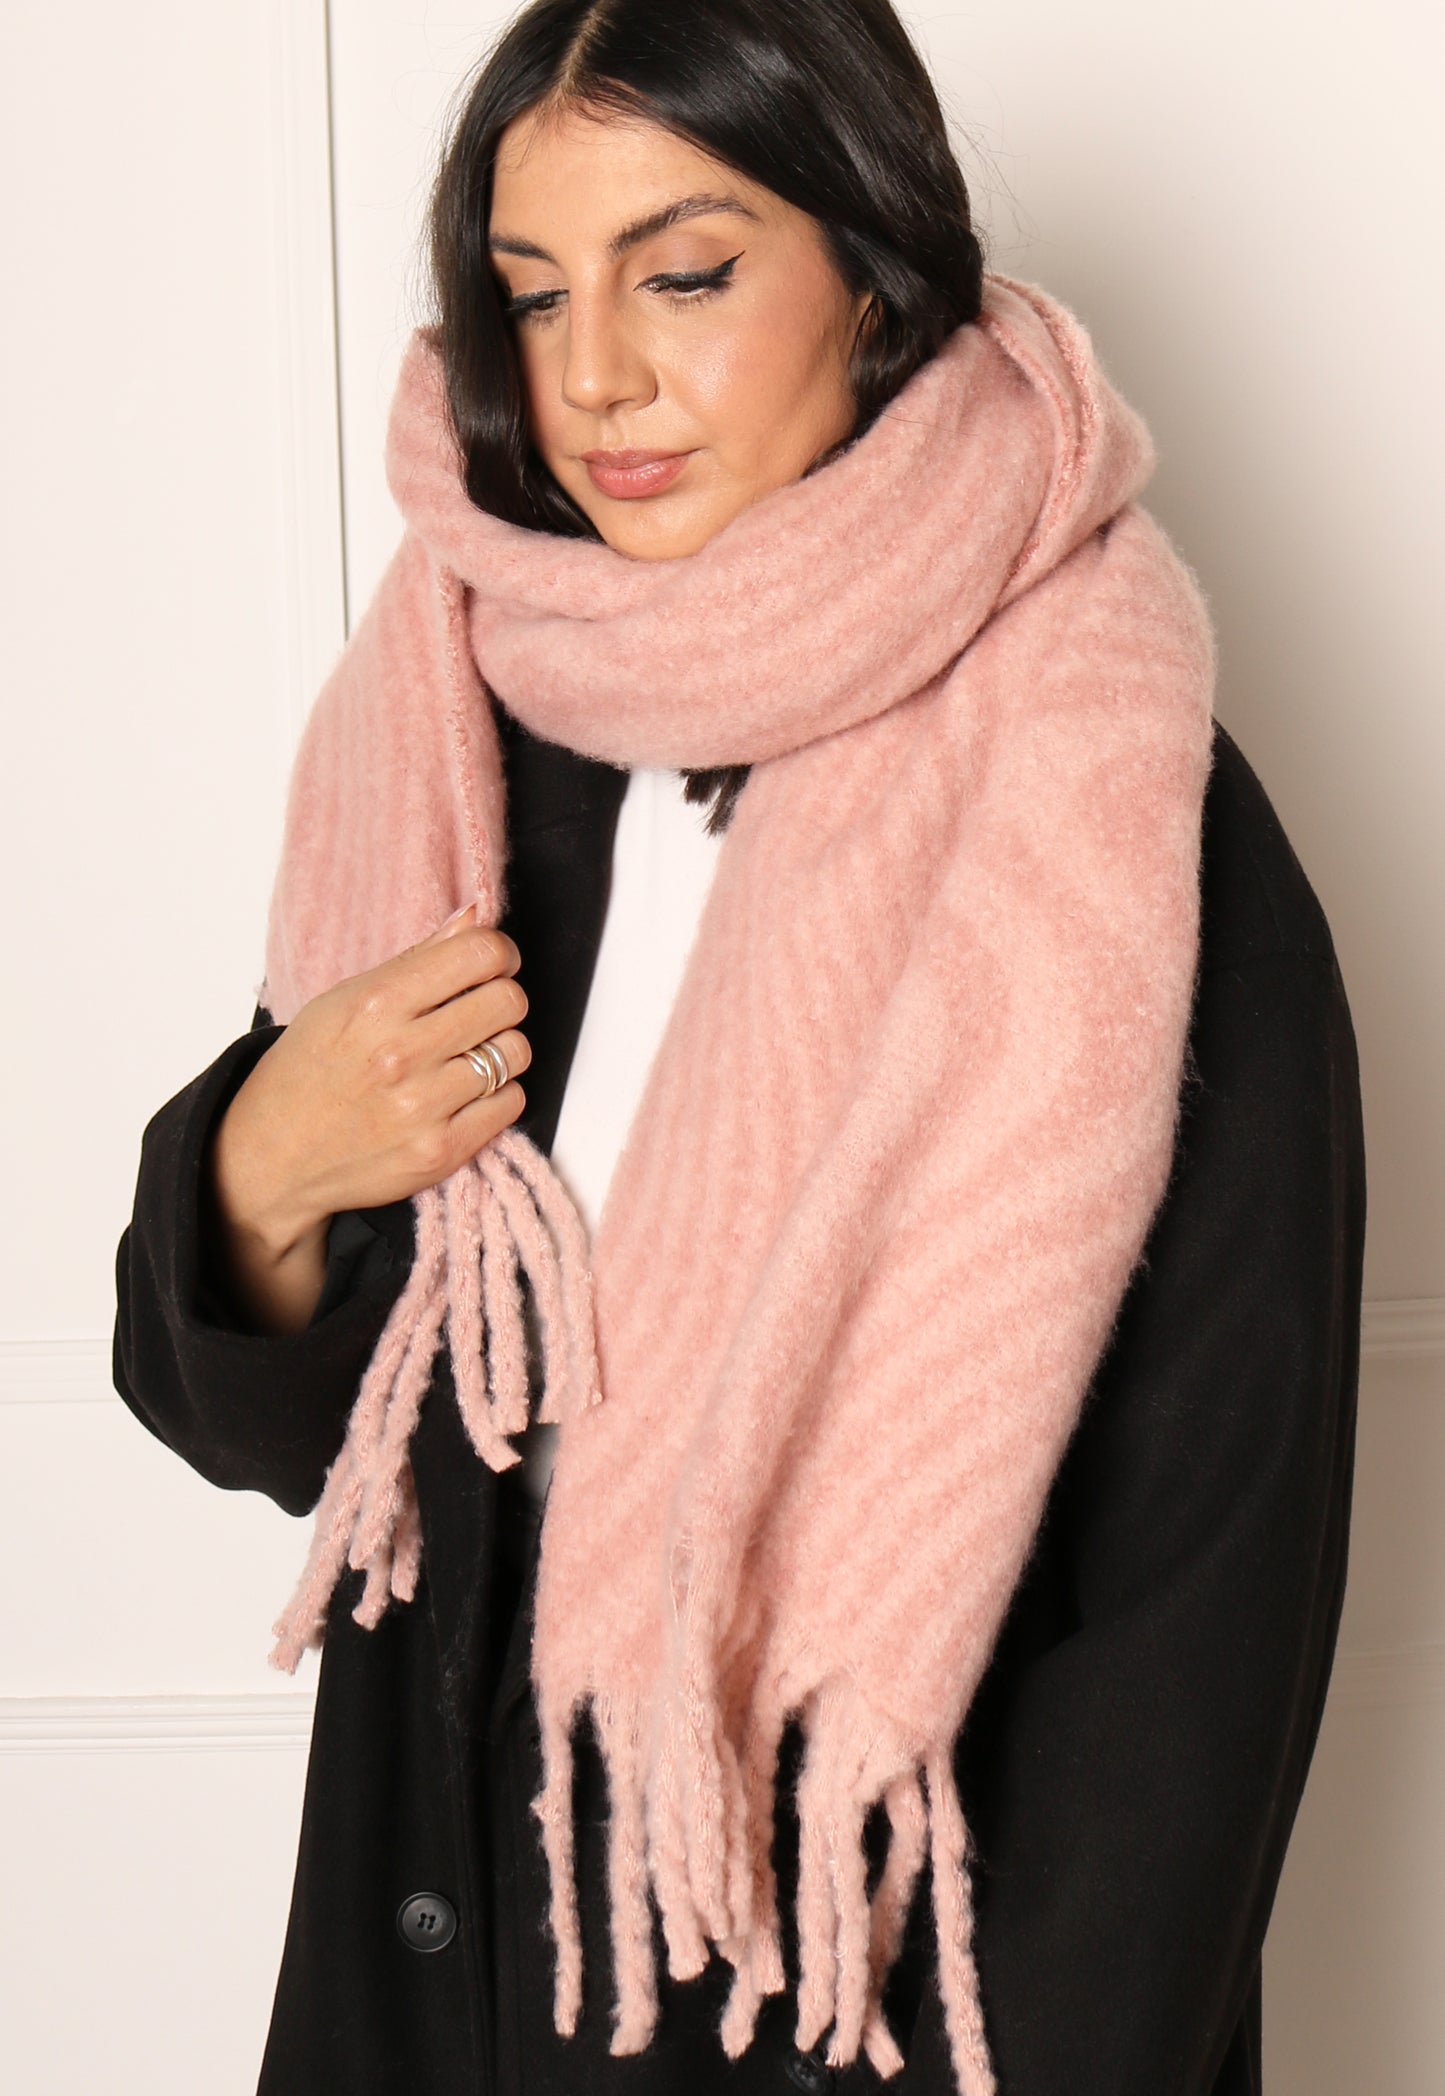 VERO MODA Gabby Oversized Brushed Scarf with Abstract Swirls Tassels in Dusky Pink - One Nation Clothing